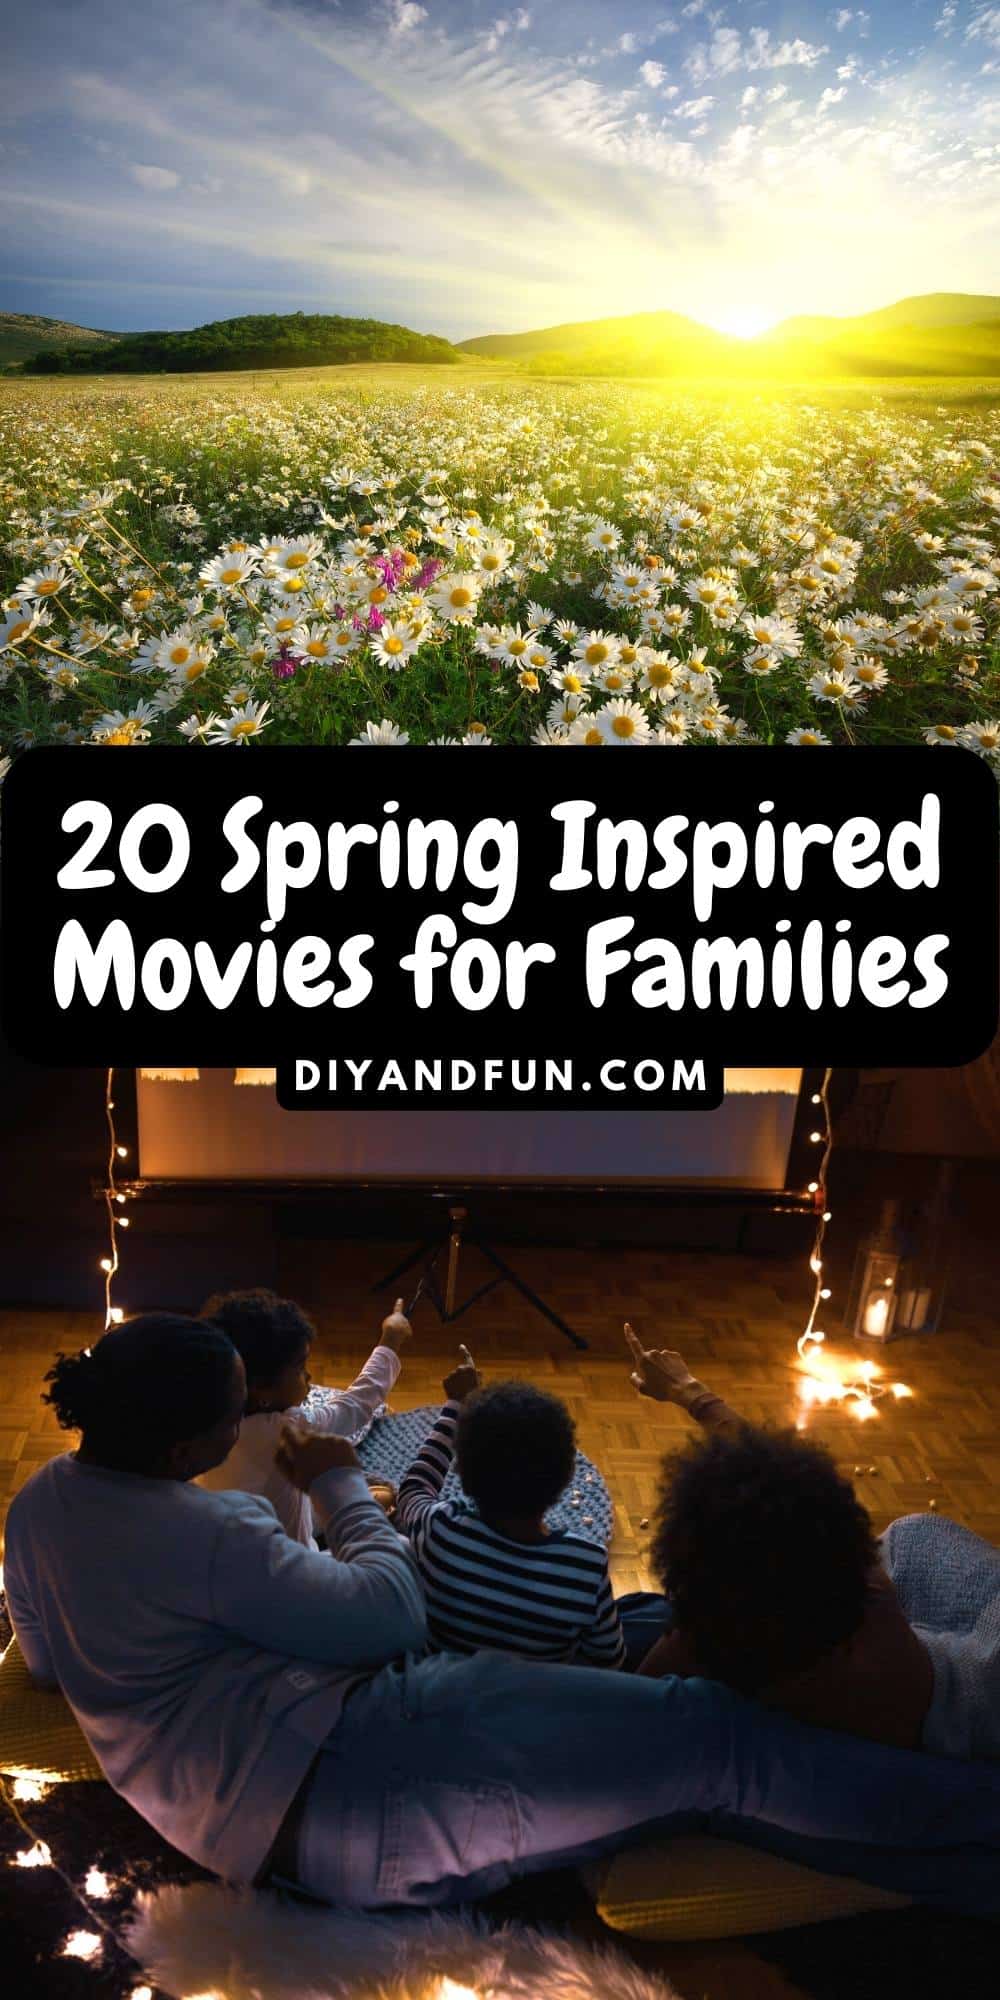 20 Spring Inspired Movies for Families, a simple listing of what makes a good family movie for all ages to enjoy.